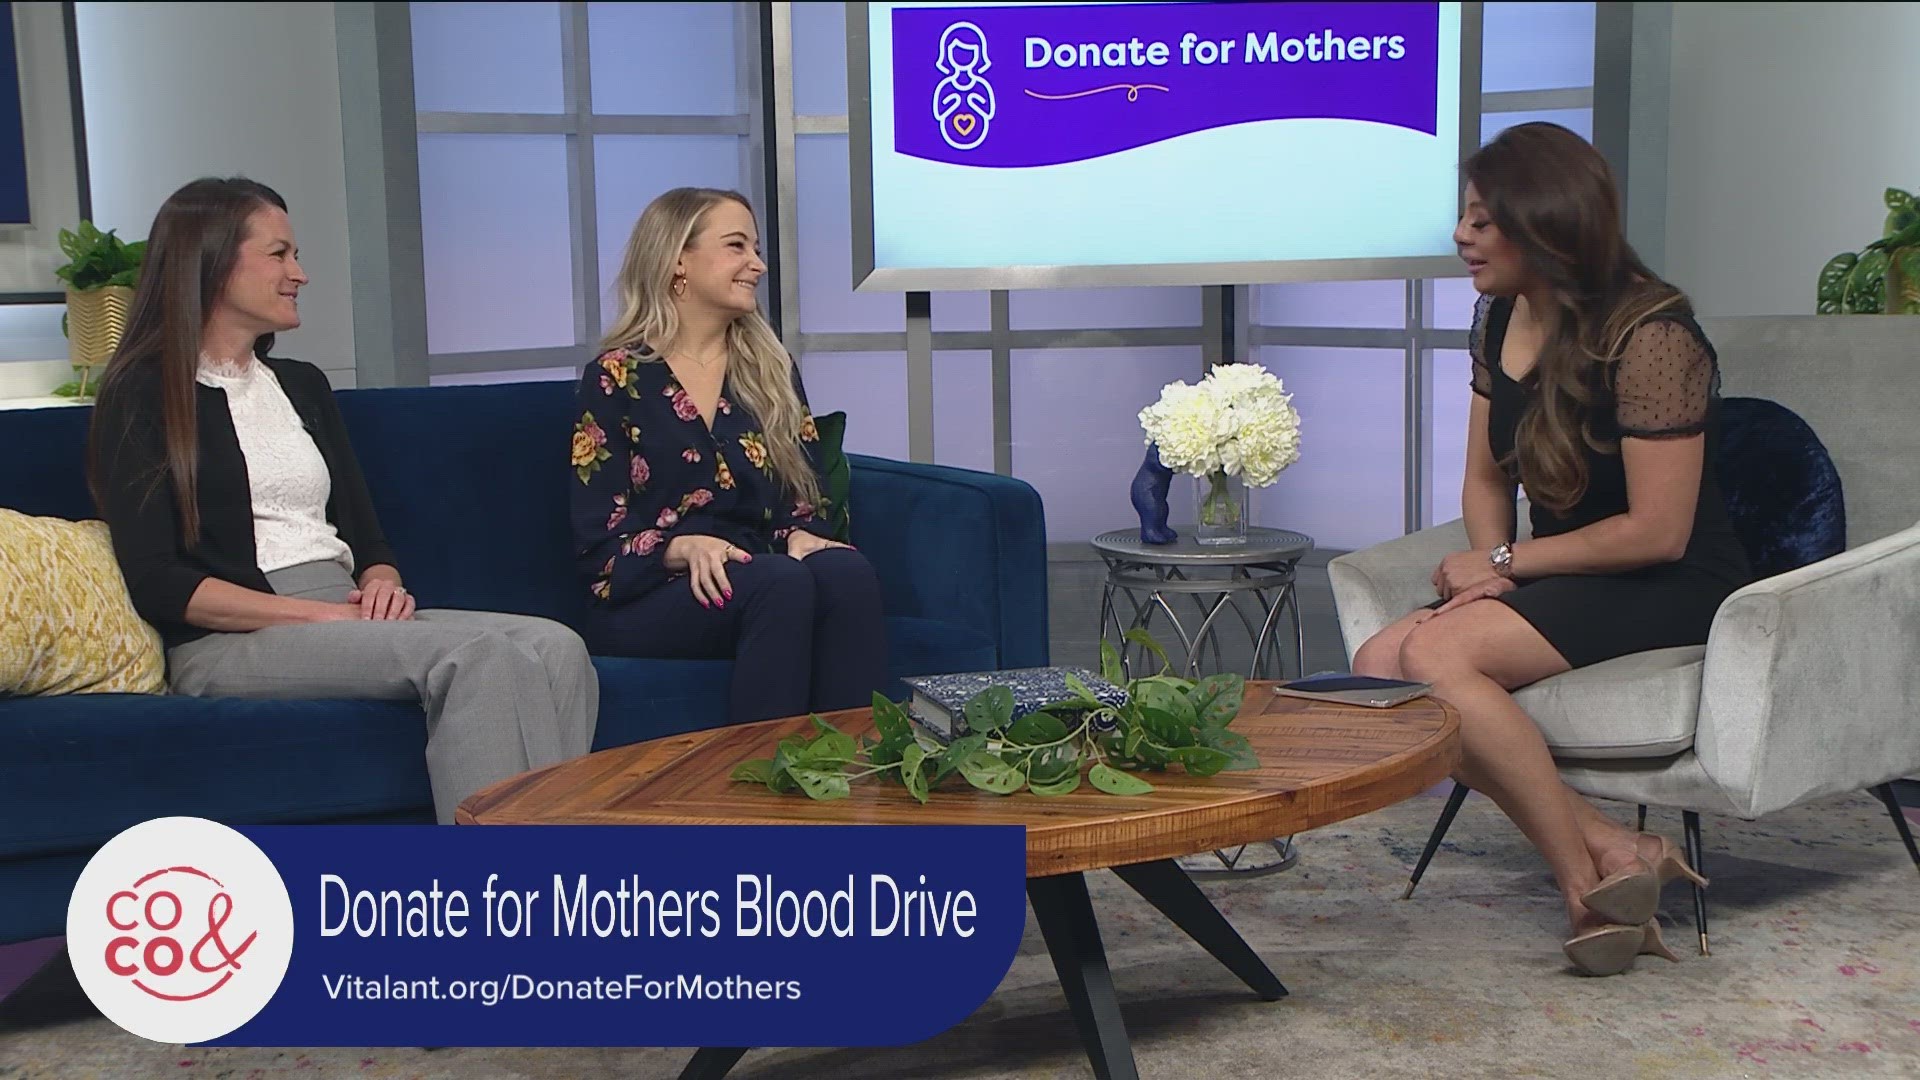 Donate before the end of May to be entered to win one of three $5000 prepaid gift cards! Find a donation site near you at Vitalant.org/DonateForMothers.